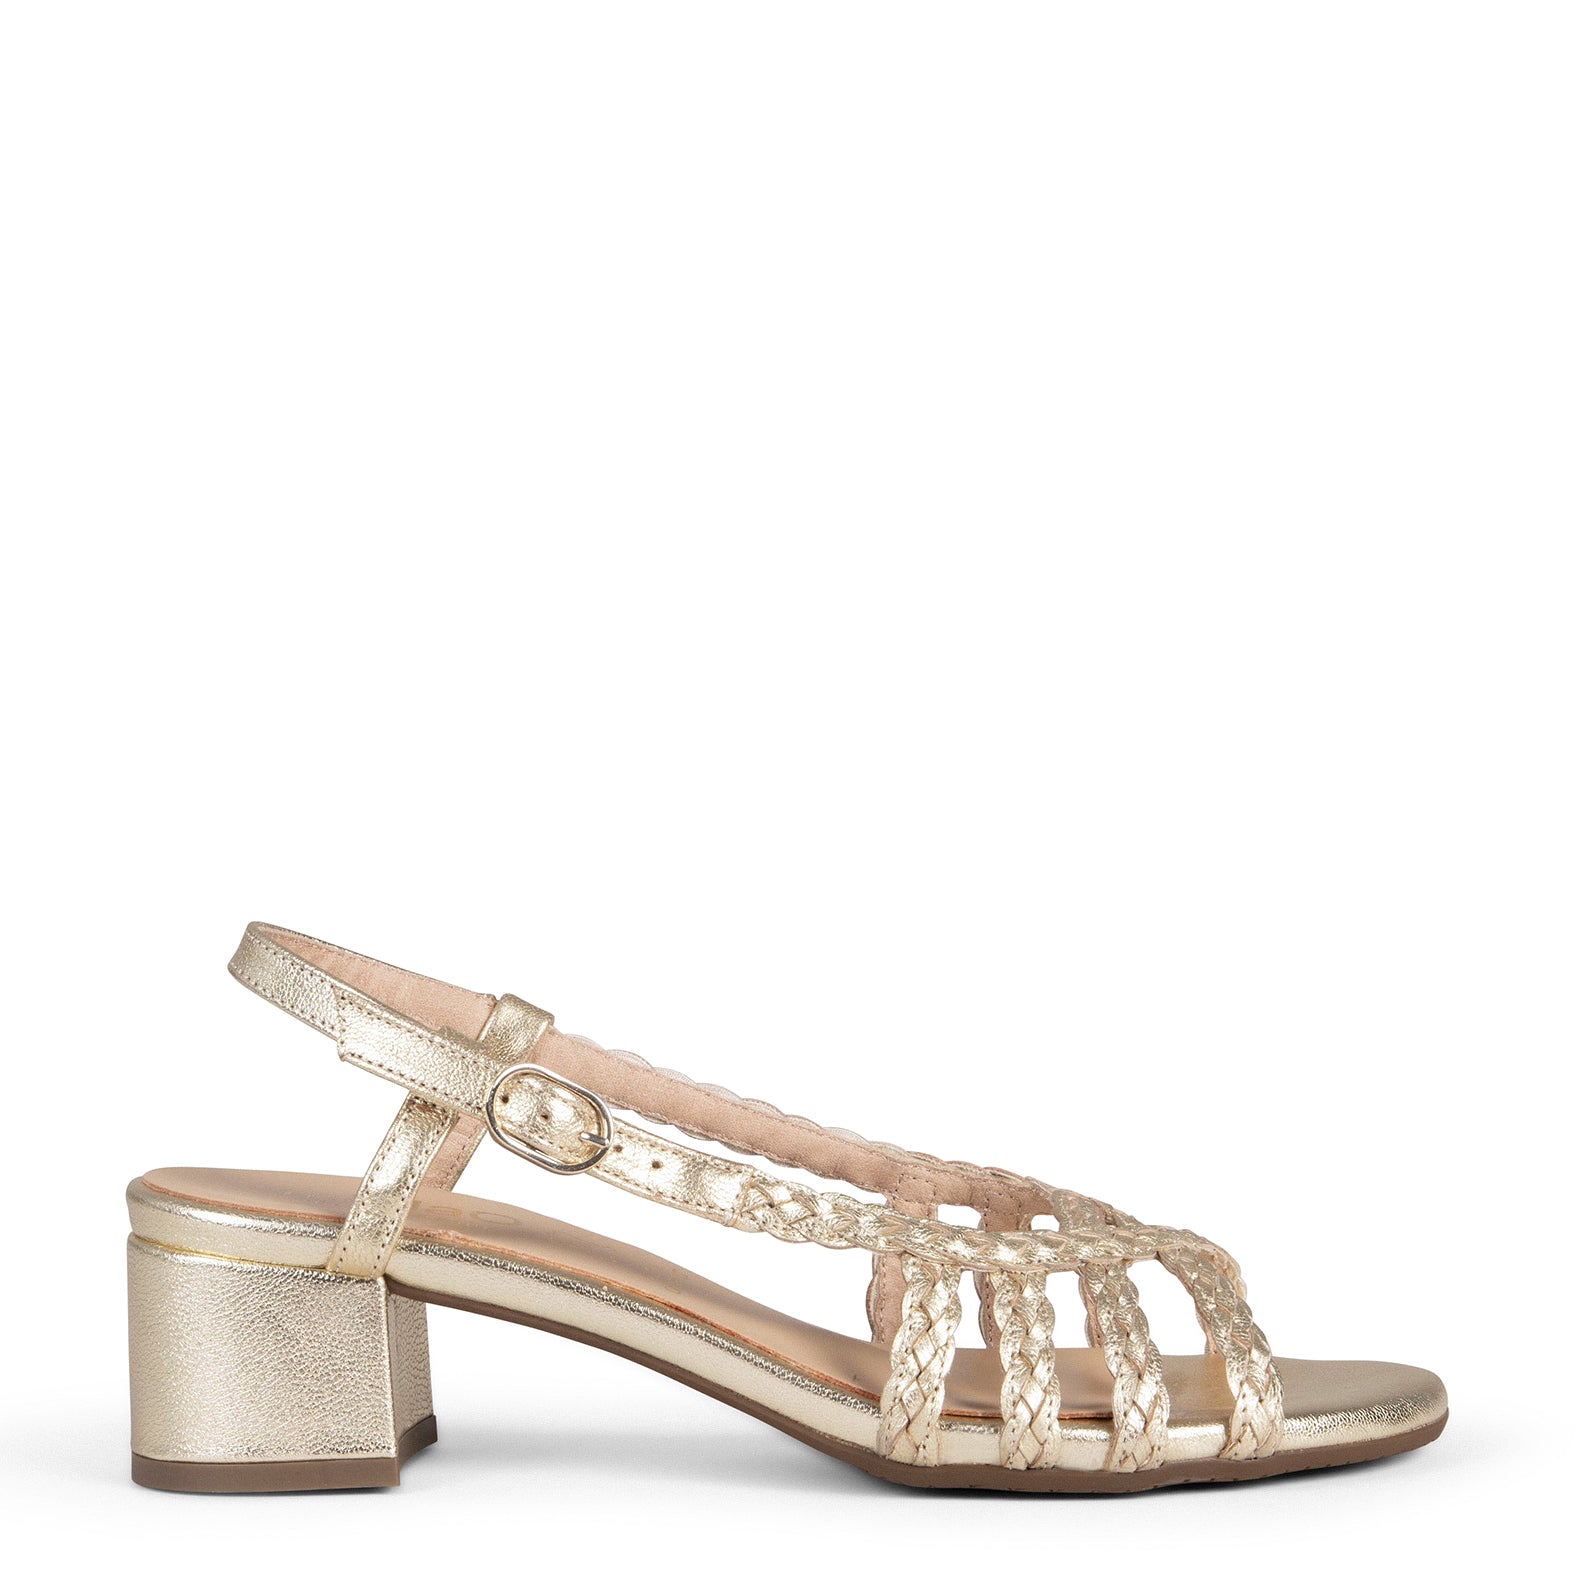 LINA – GOLD Women Casual Sandals